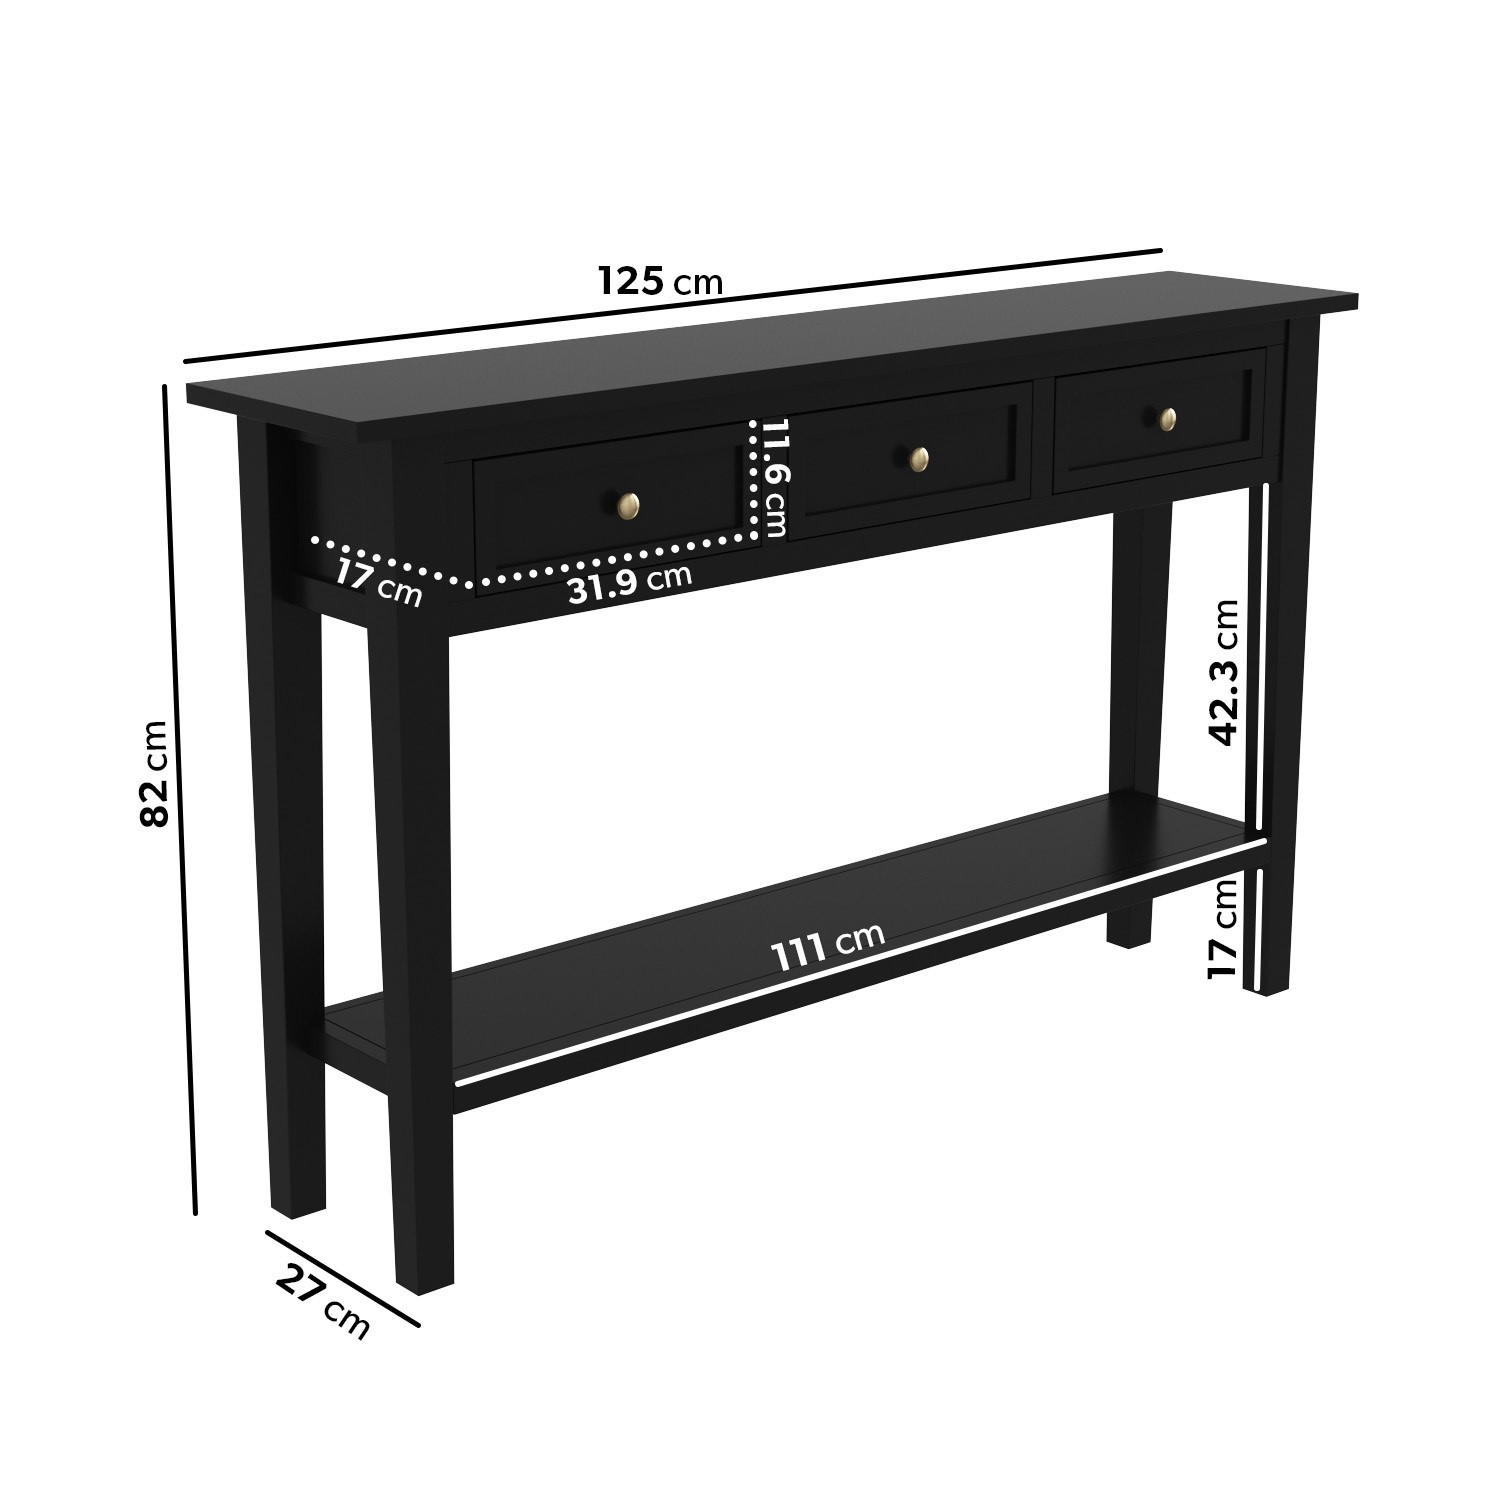 Read more about Narrow black wood console table with drawers elms